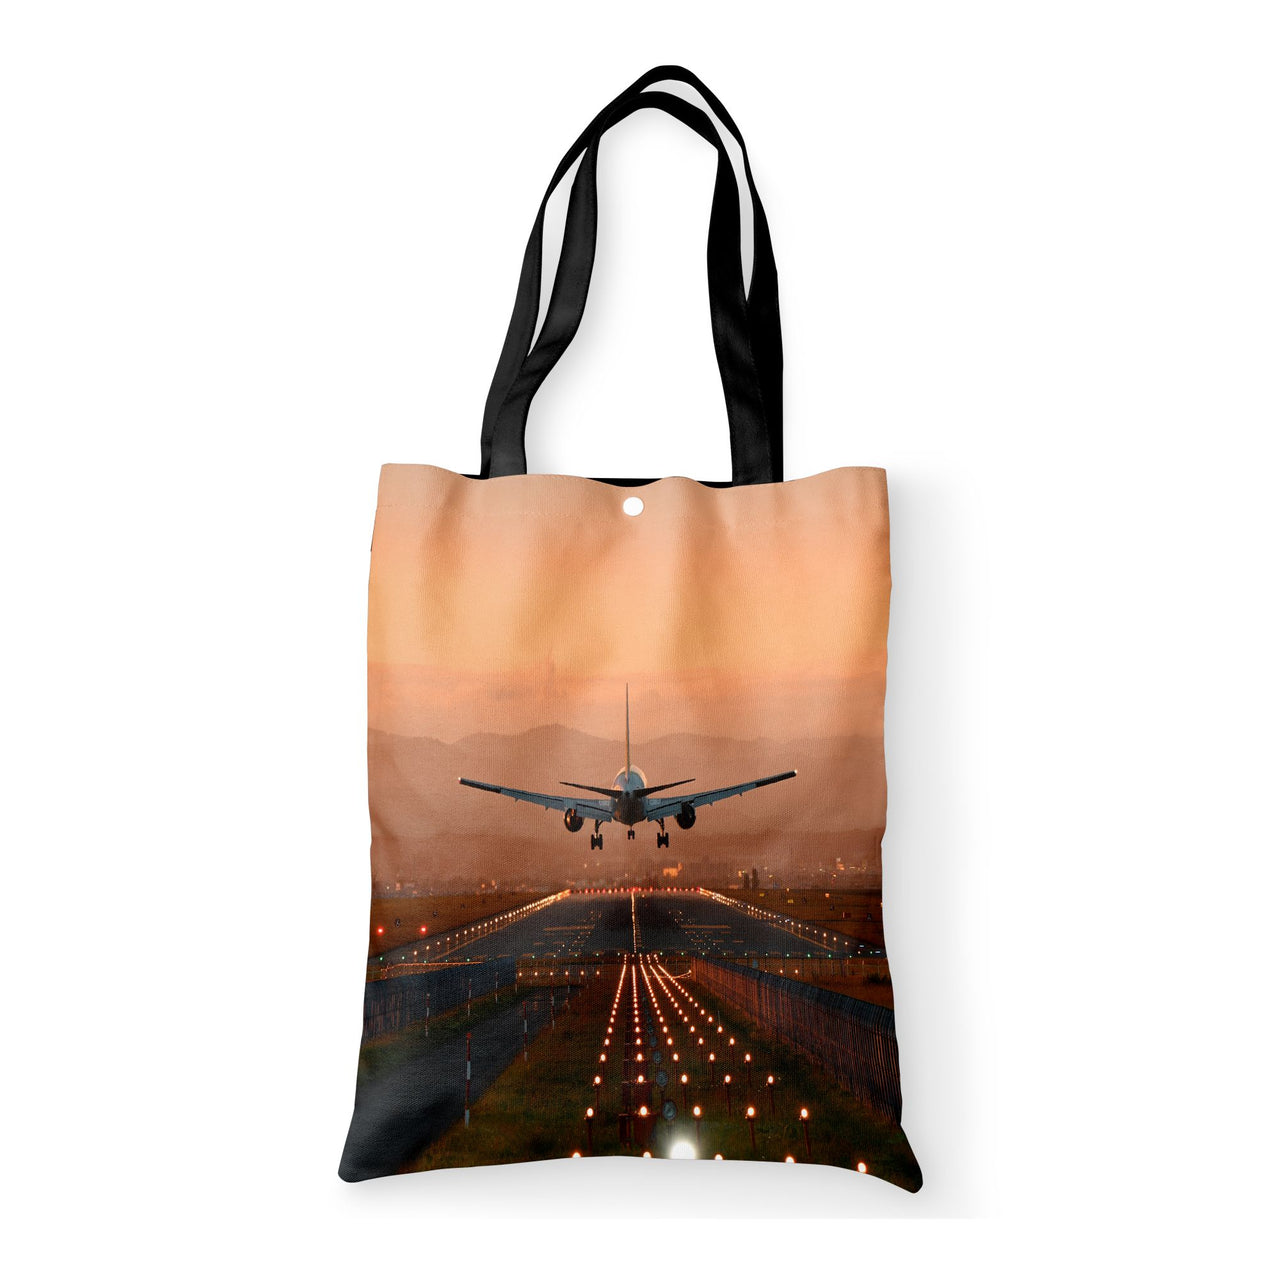 Super Cool Landing During Sunset Designed Tote Bags